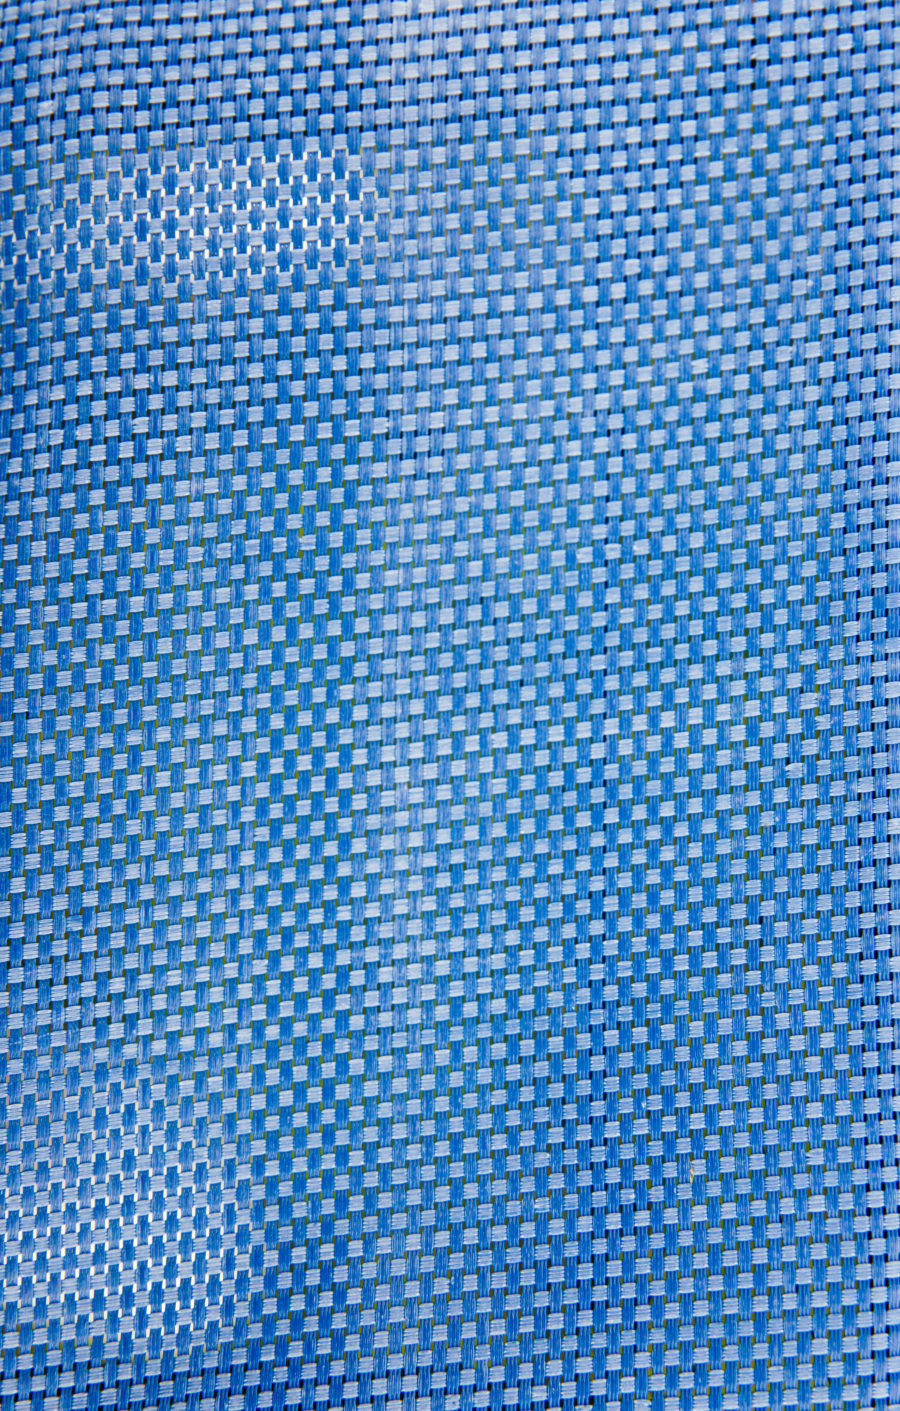 Two more blue backgrounds of plastic mesh textures